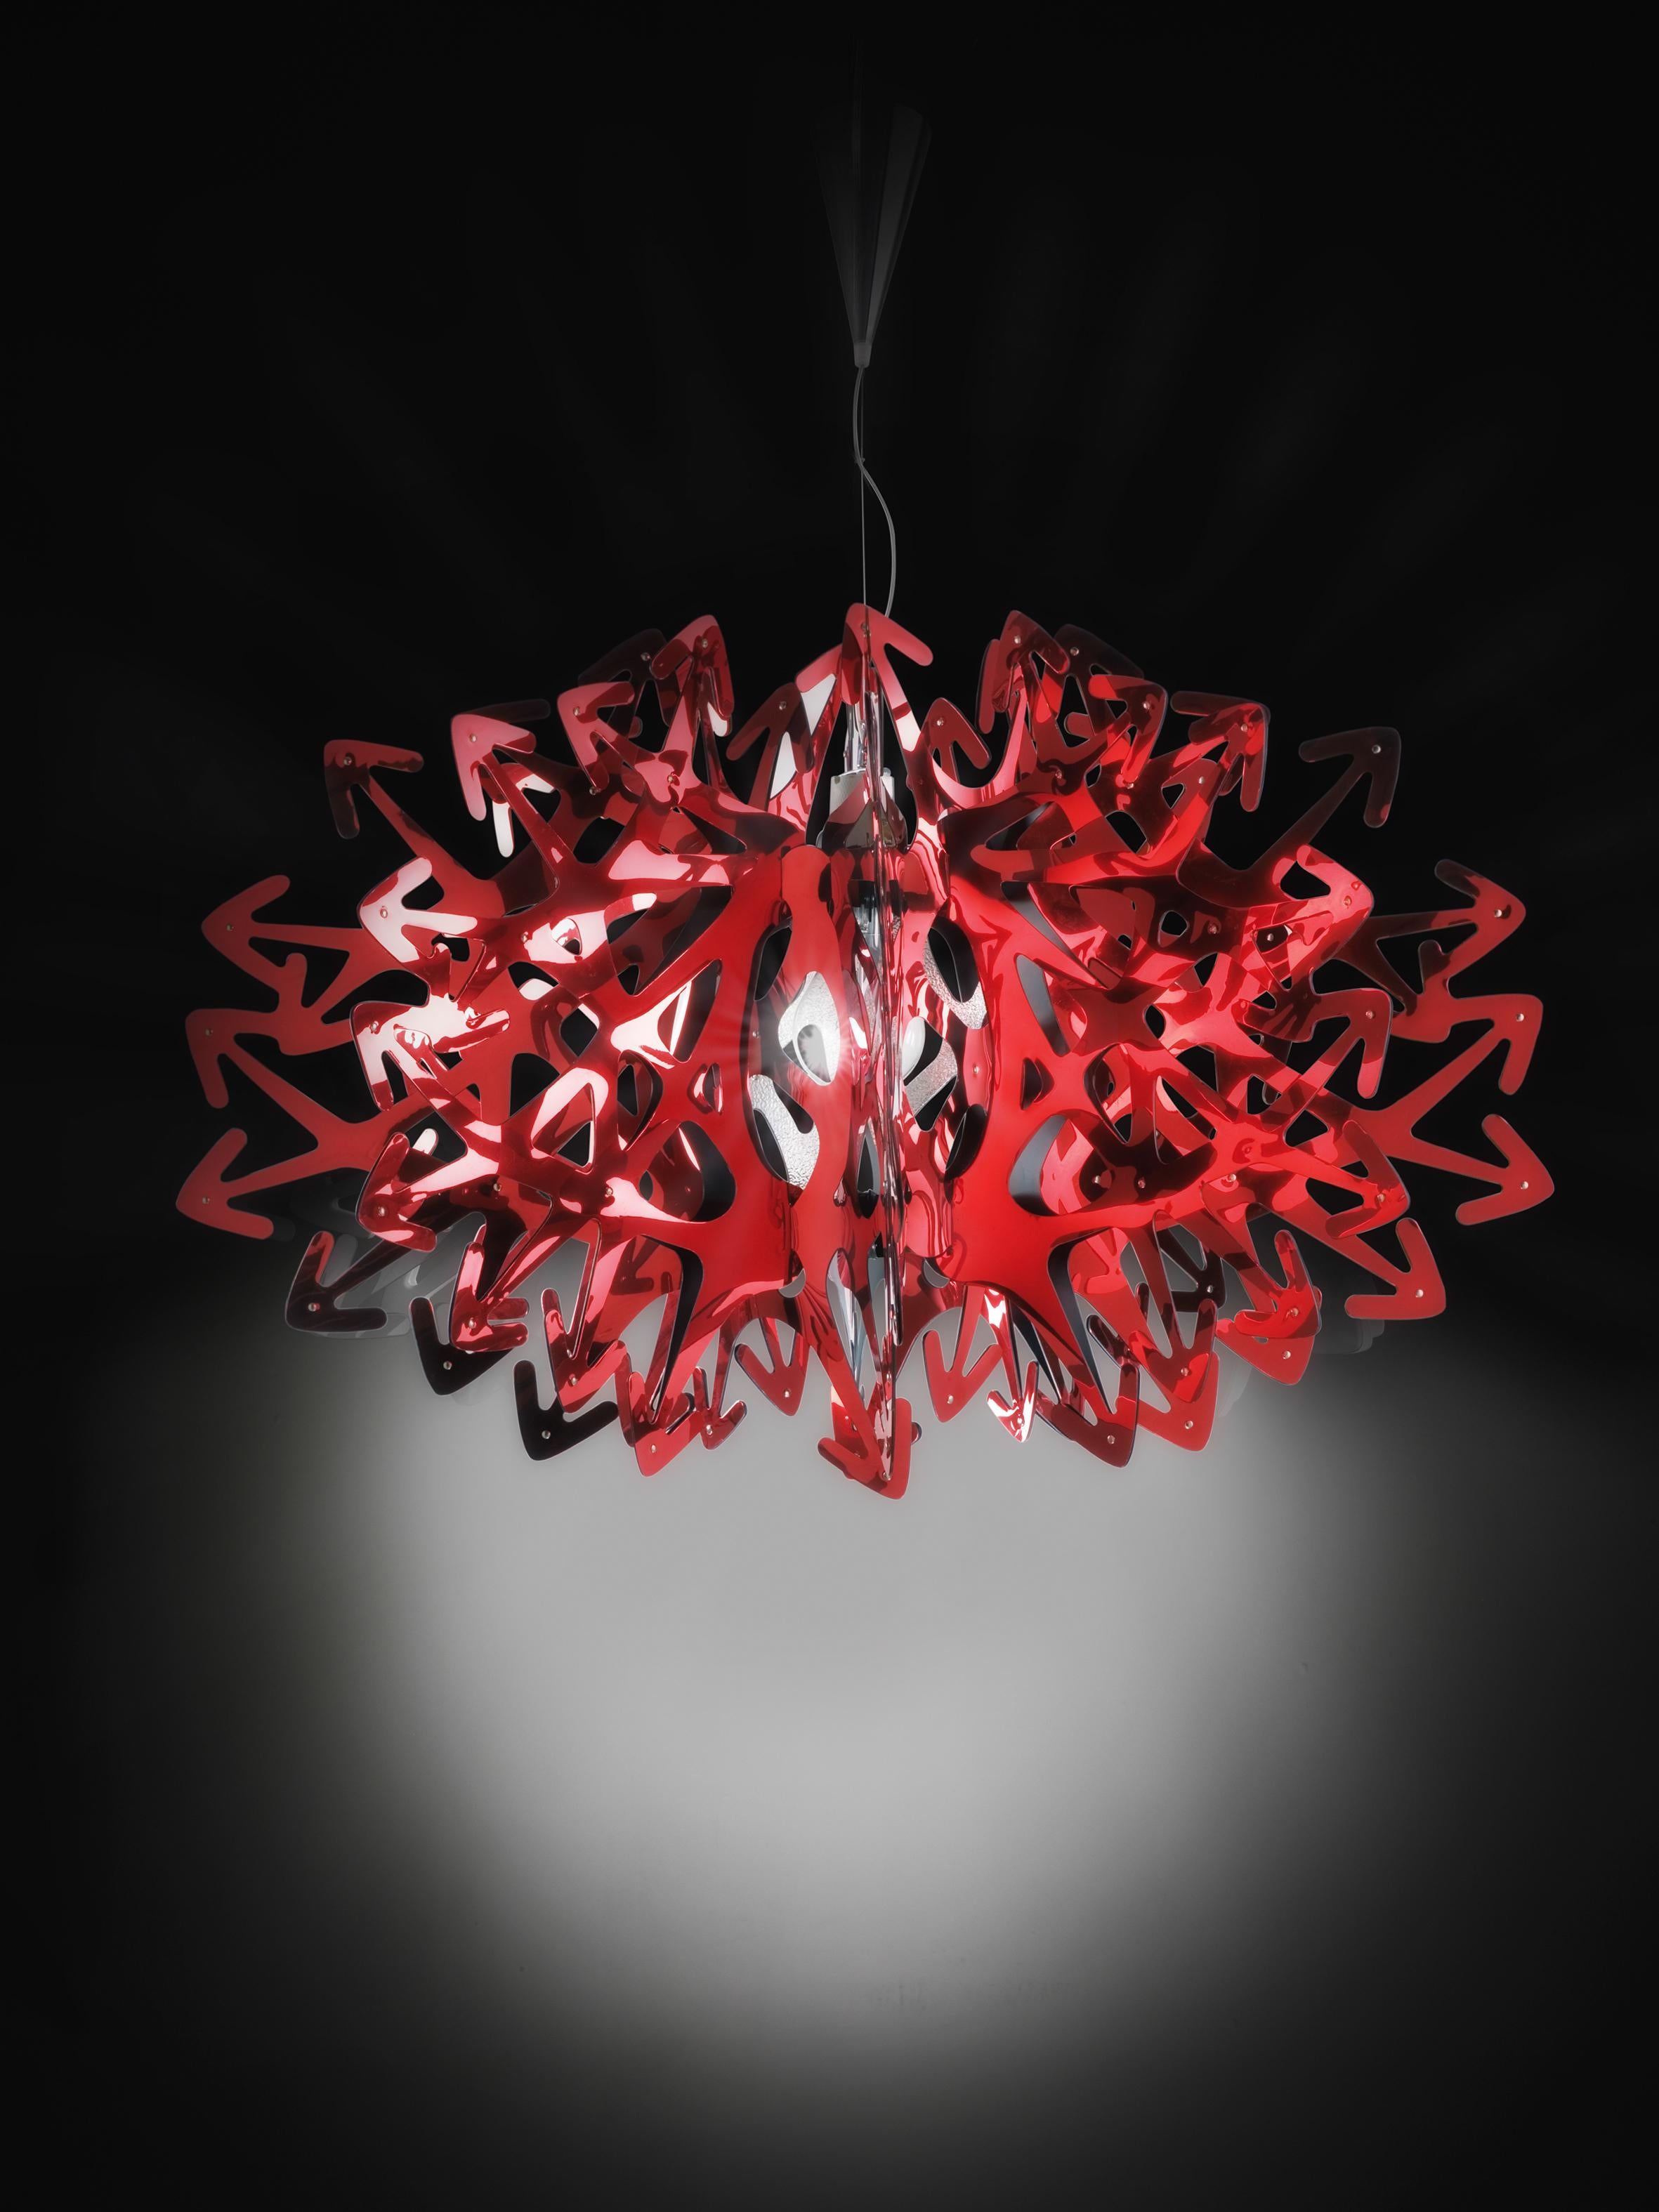 A meter-wide, opulent chandelier that brings sparkle to any interior. The layering of multiple, red metalized Steelflex® arrows make Devil mysterious and seductive, a tempting choice for spaces in need of personality and charisma. The lamp casts a